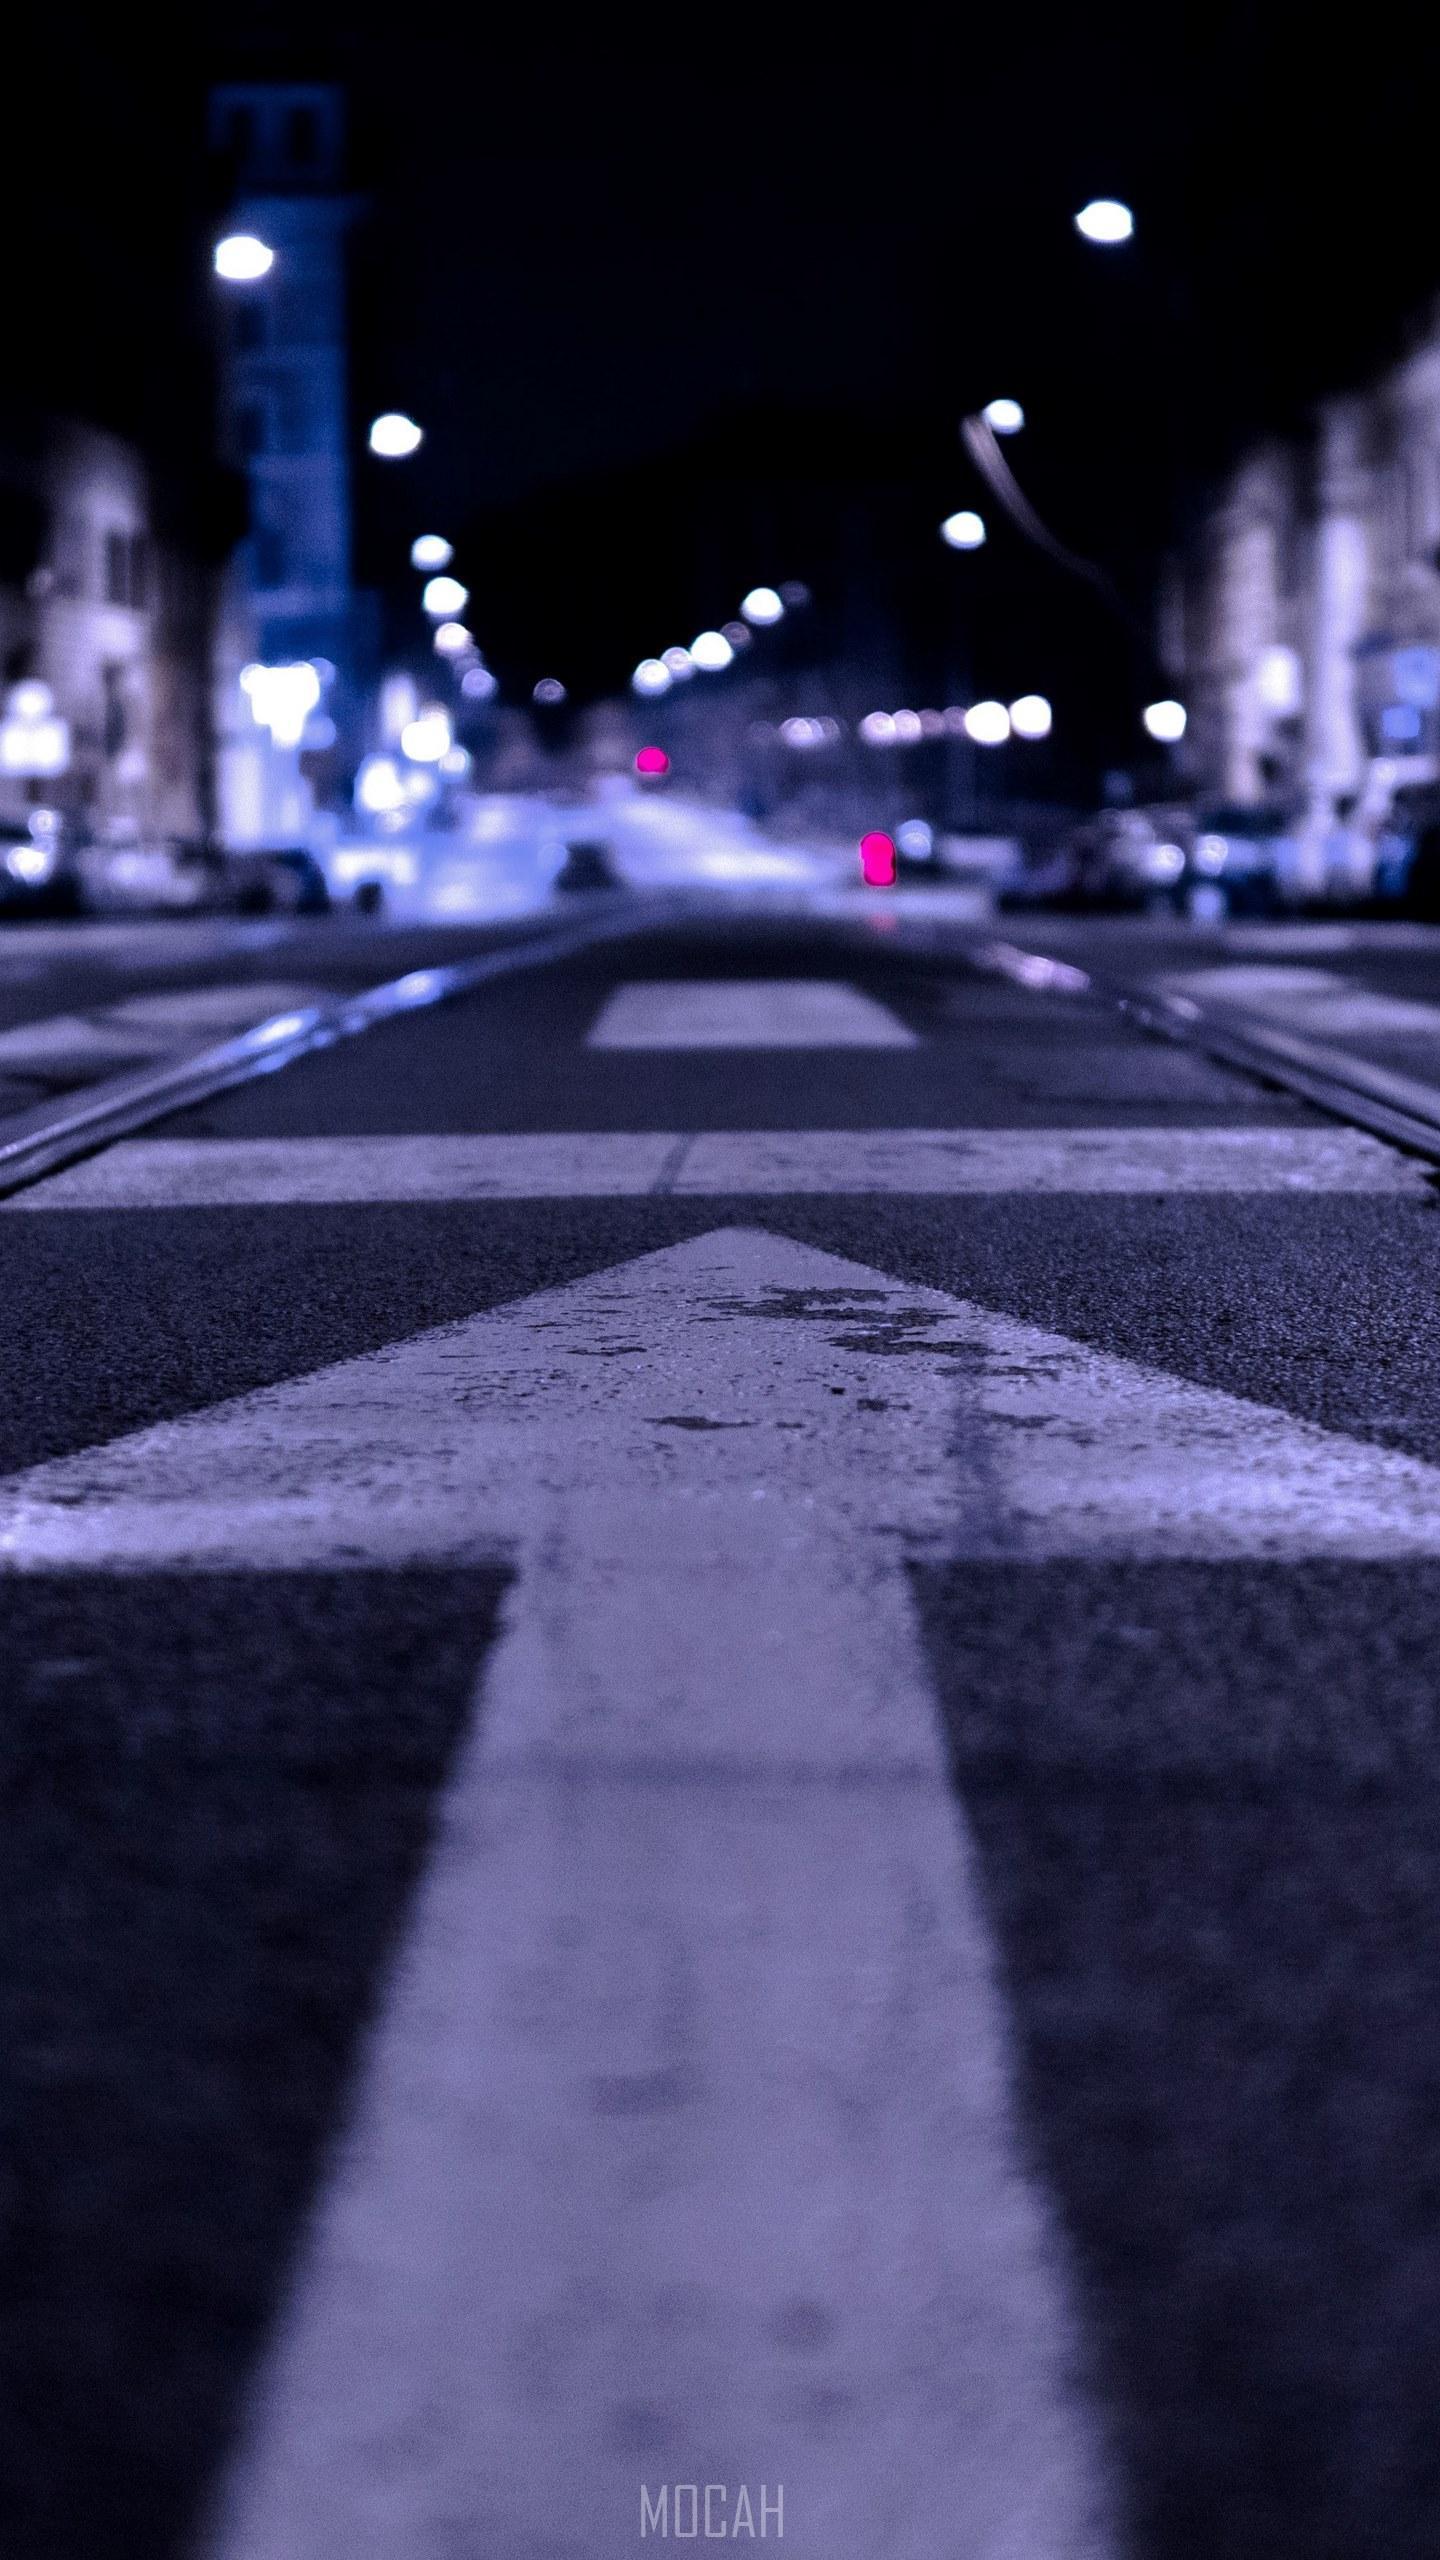 HD wallpaper, Nokia 8 Hd Download, Always Forward, 1440X2560, A White Arrow Painted On An Asphalt Road In Rome In The Evening